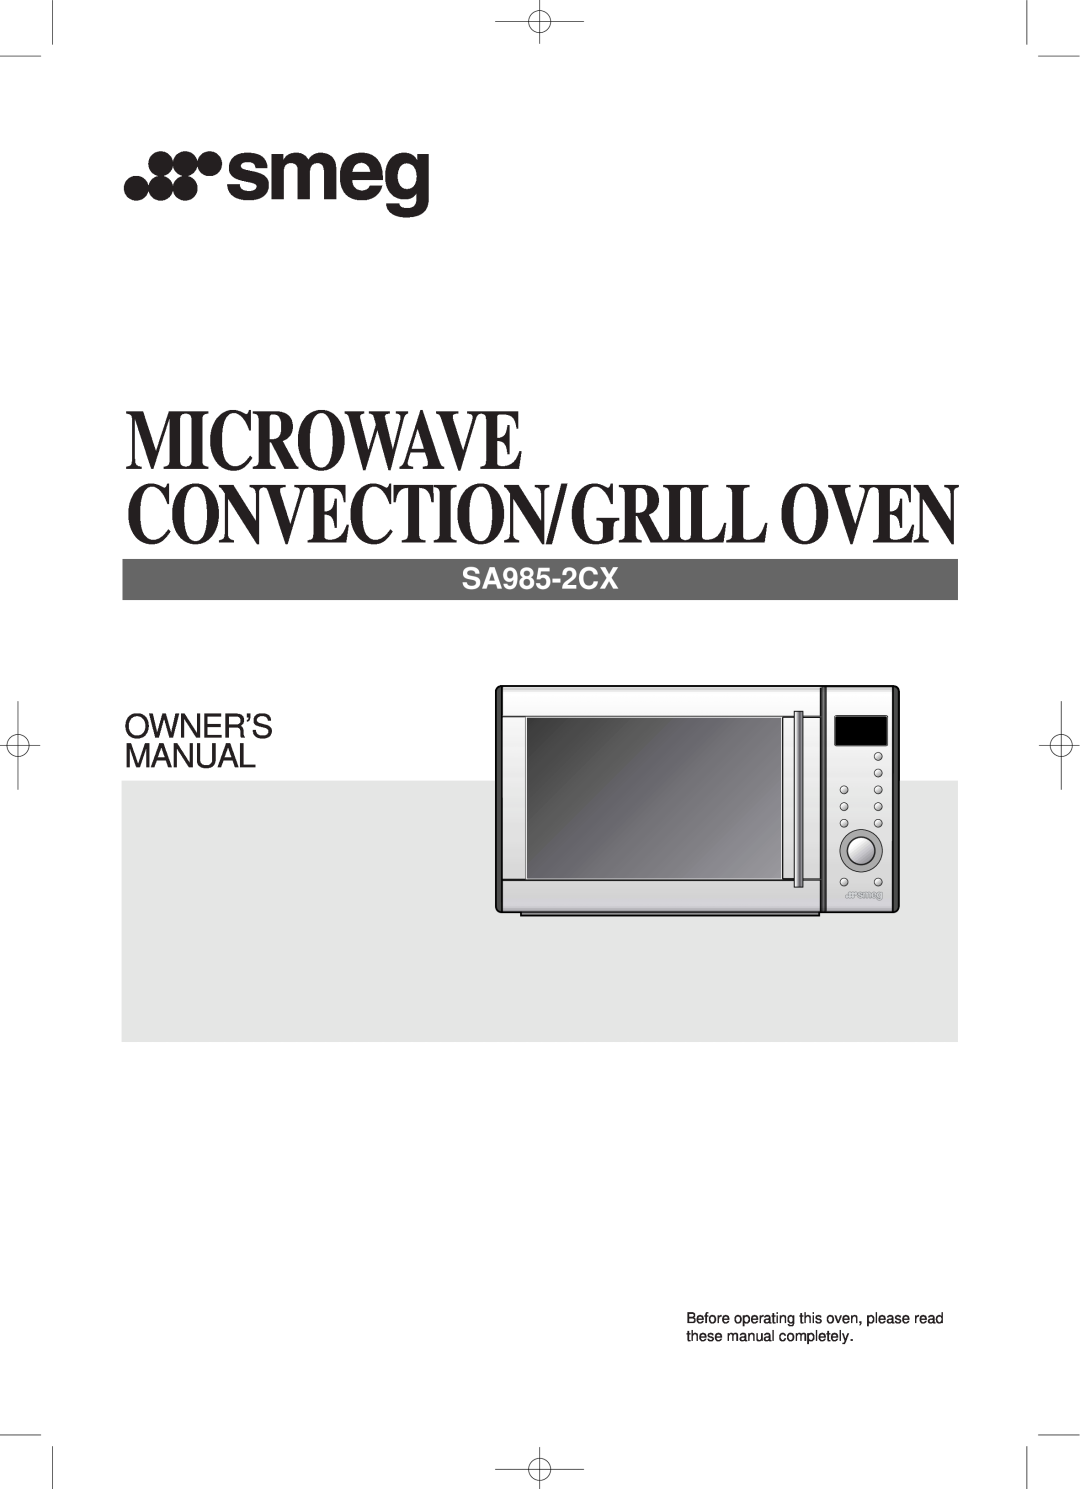 Smeg Microwave Convection/Grill Oven owner manual Microwave Convection/Grilloven, Owner’S Manual, SA985-2CX 